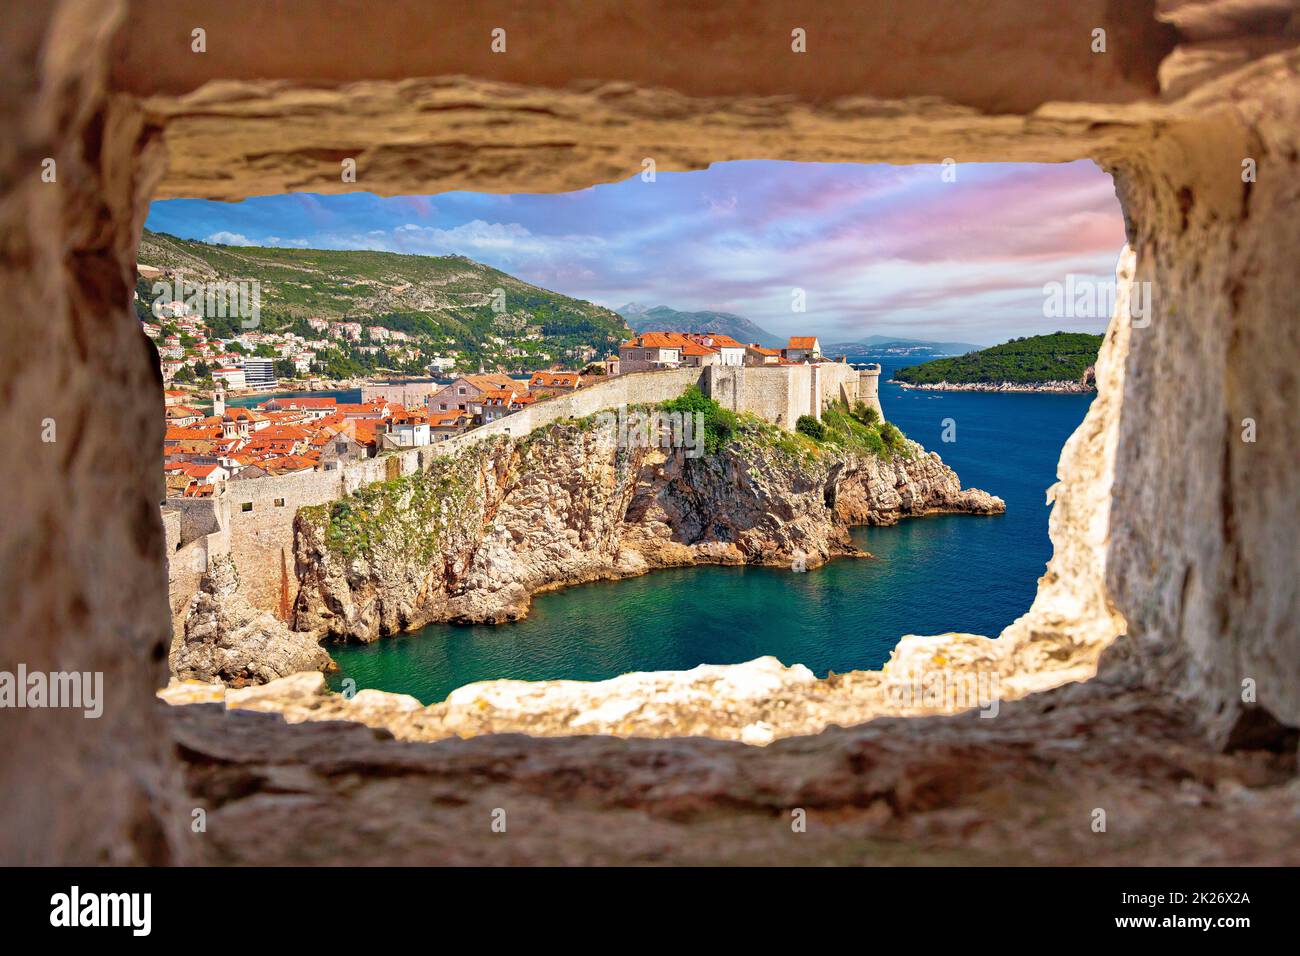 Town of Dubrovnik and defence walls view through stone window Stock Photo